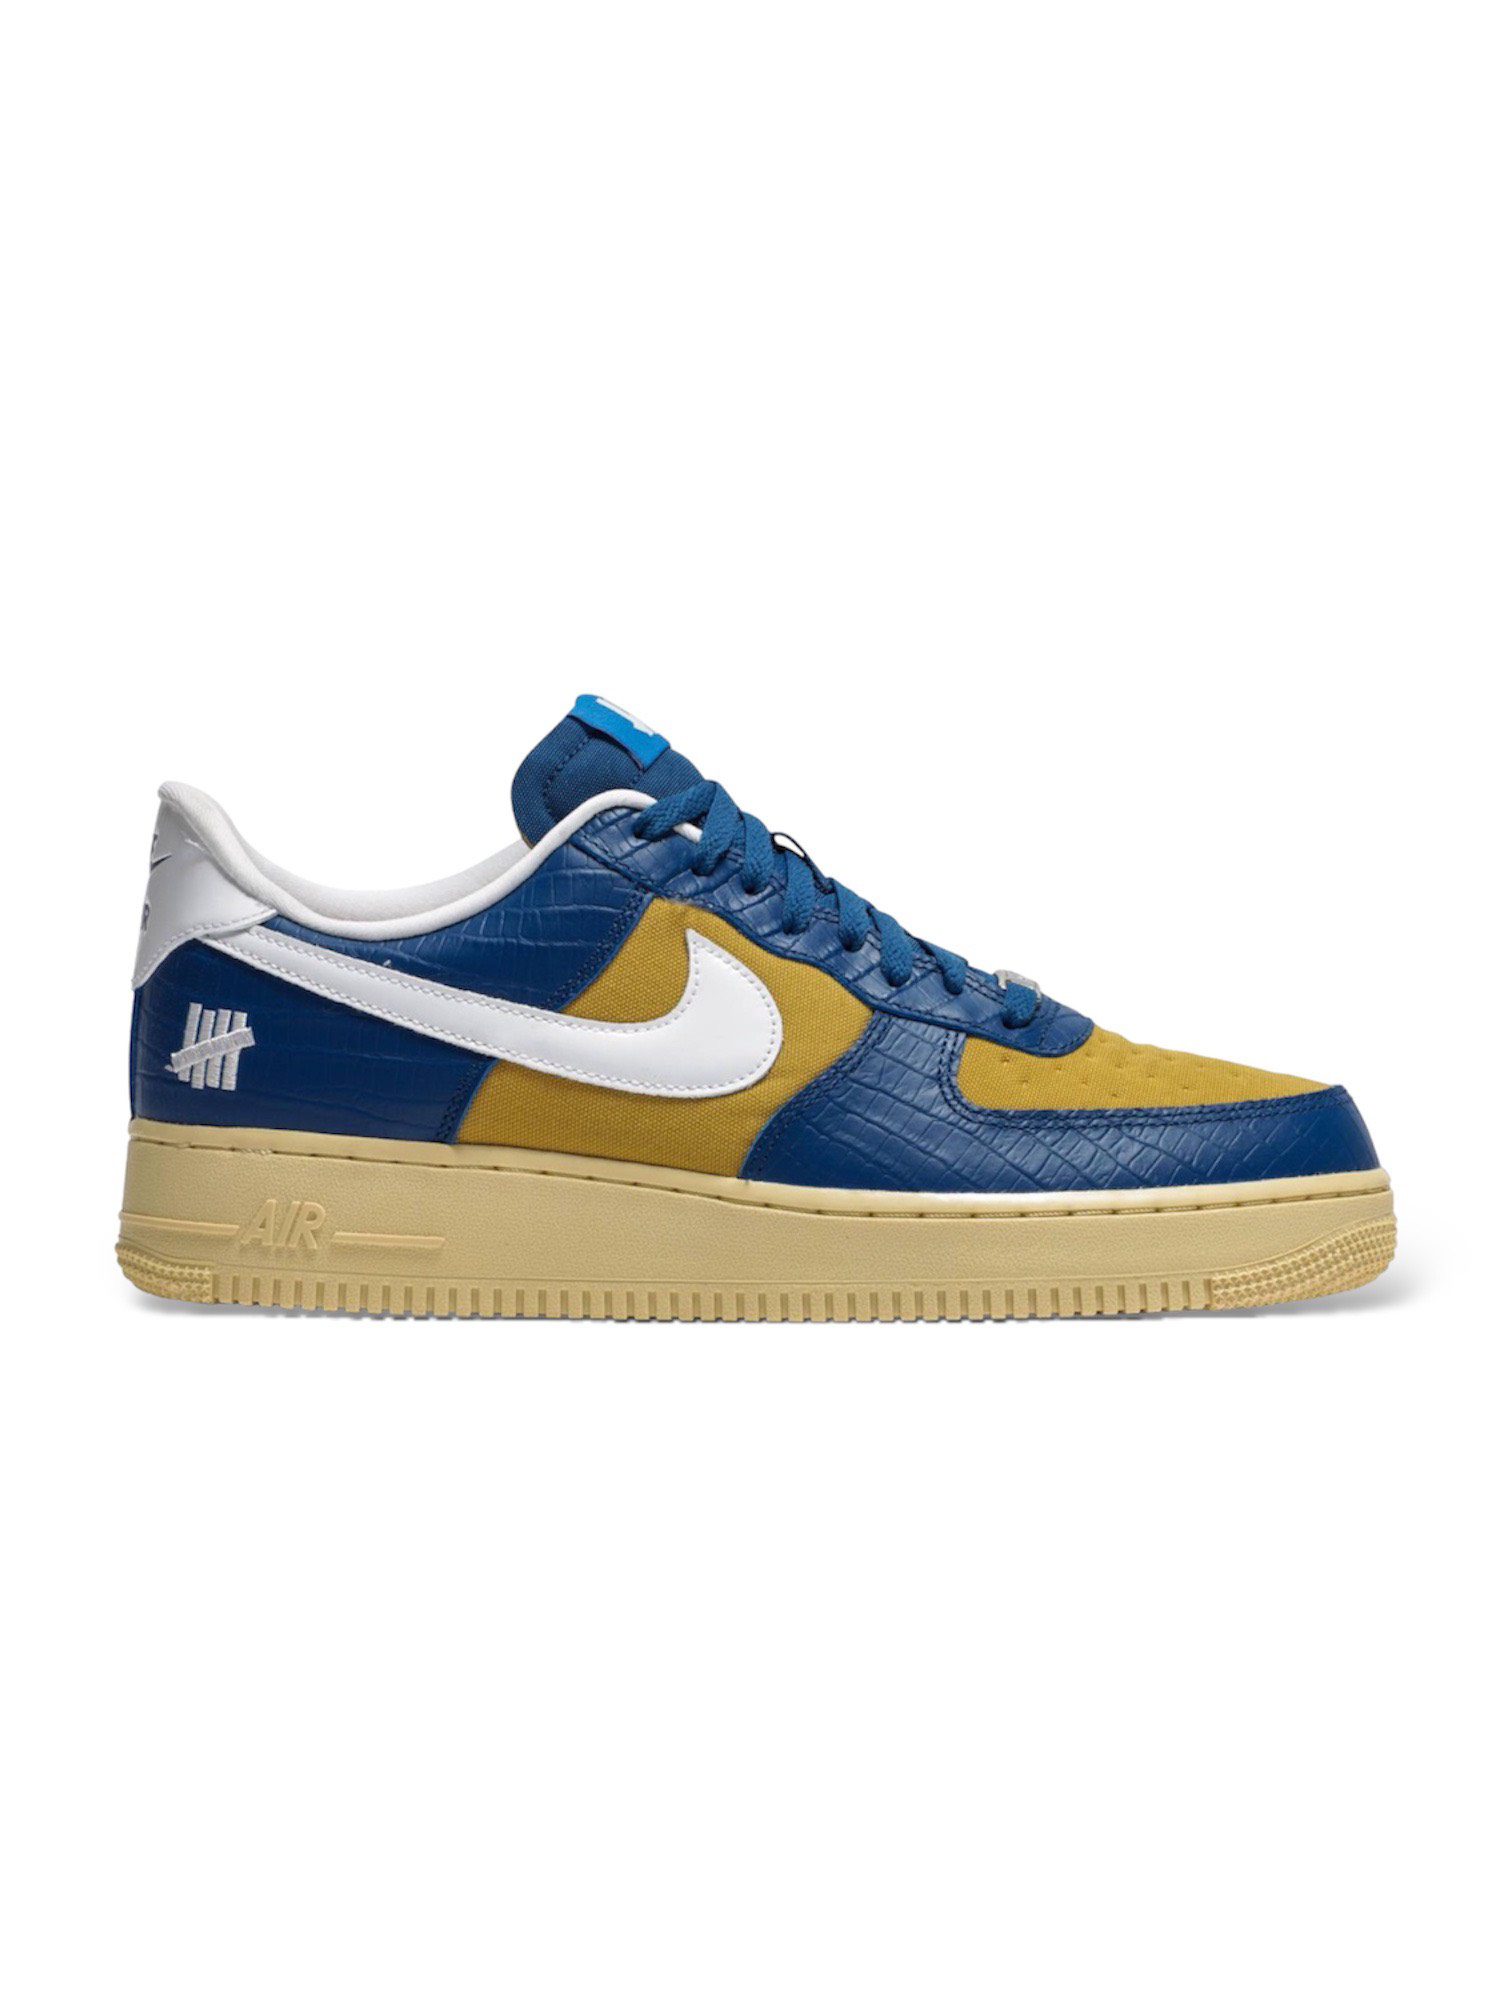 Nike Air Force 1 Undefeated Blue Yellow - AF1 Xanh Vàng